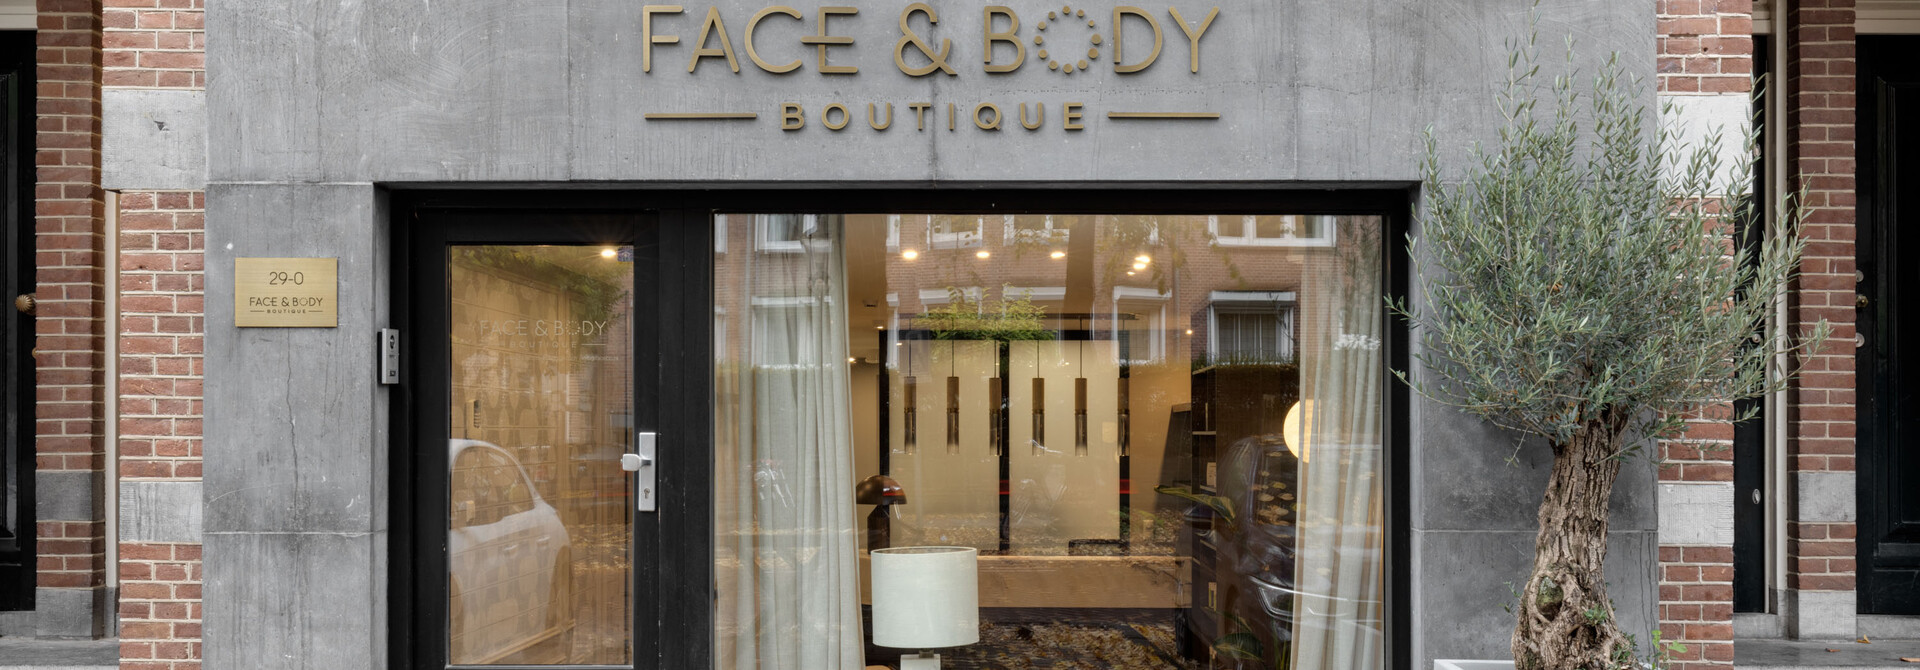 Clinic Face&Body boutique Amsterdam oud zuid